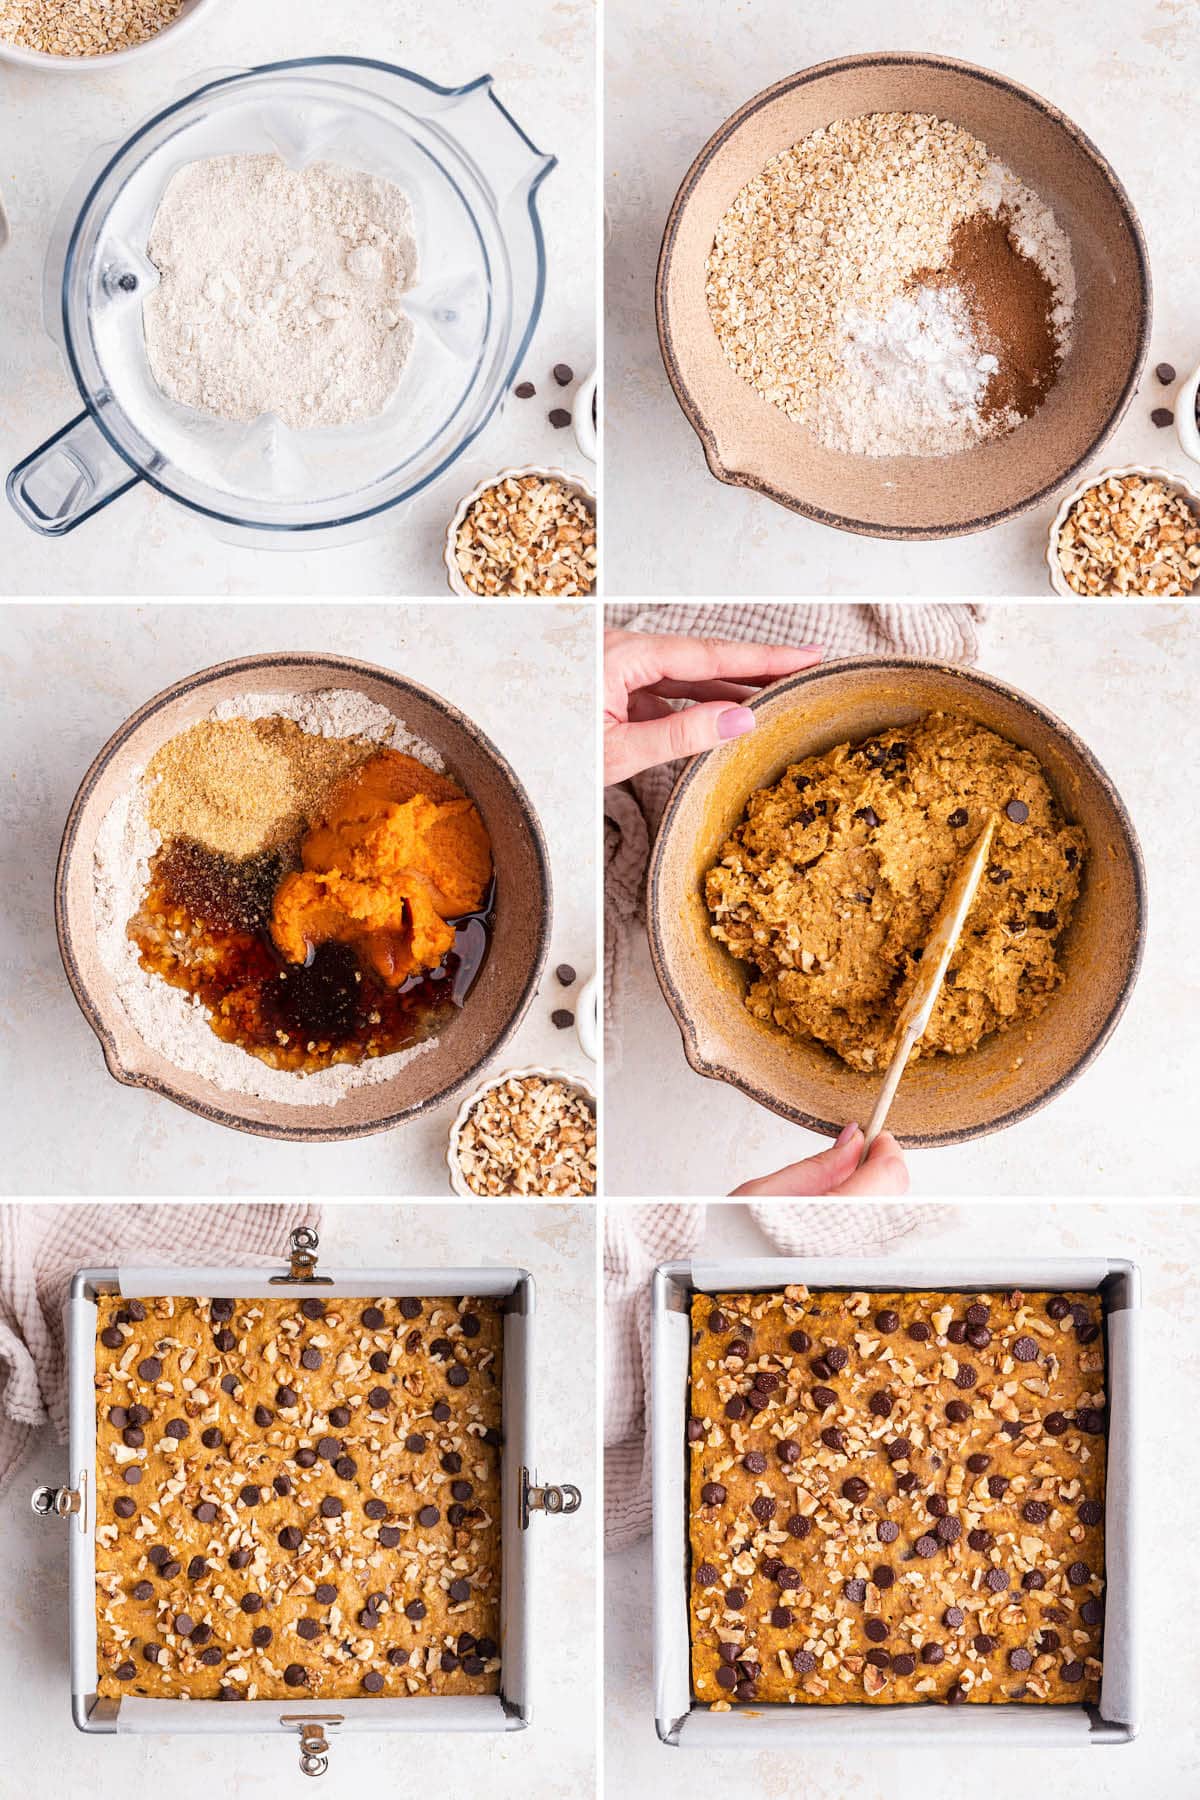 Six photos showing the steps to make Pumpkin Oatmeal Bars-- mixing the batter and then baking in a pan.